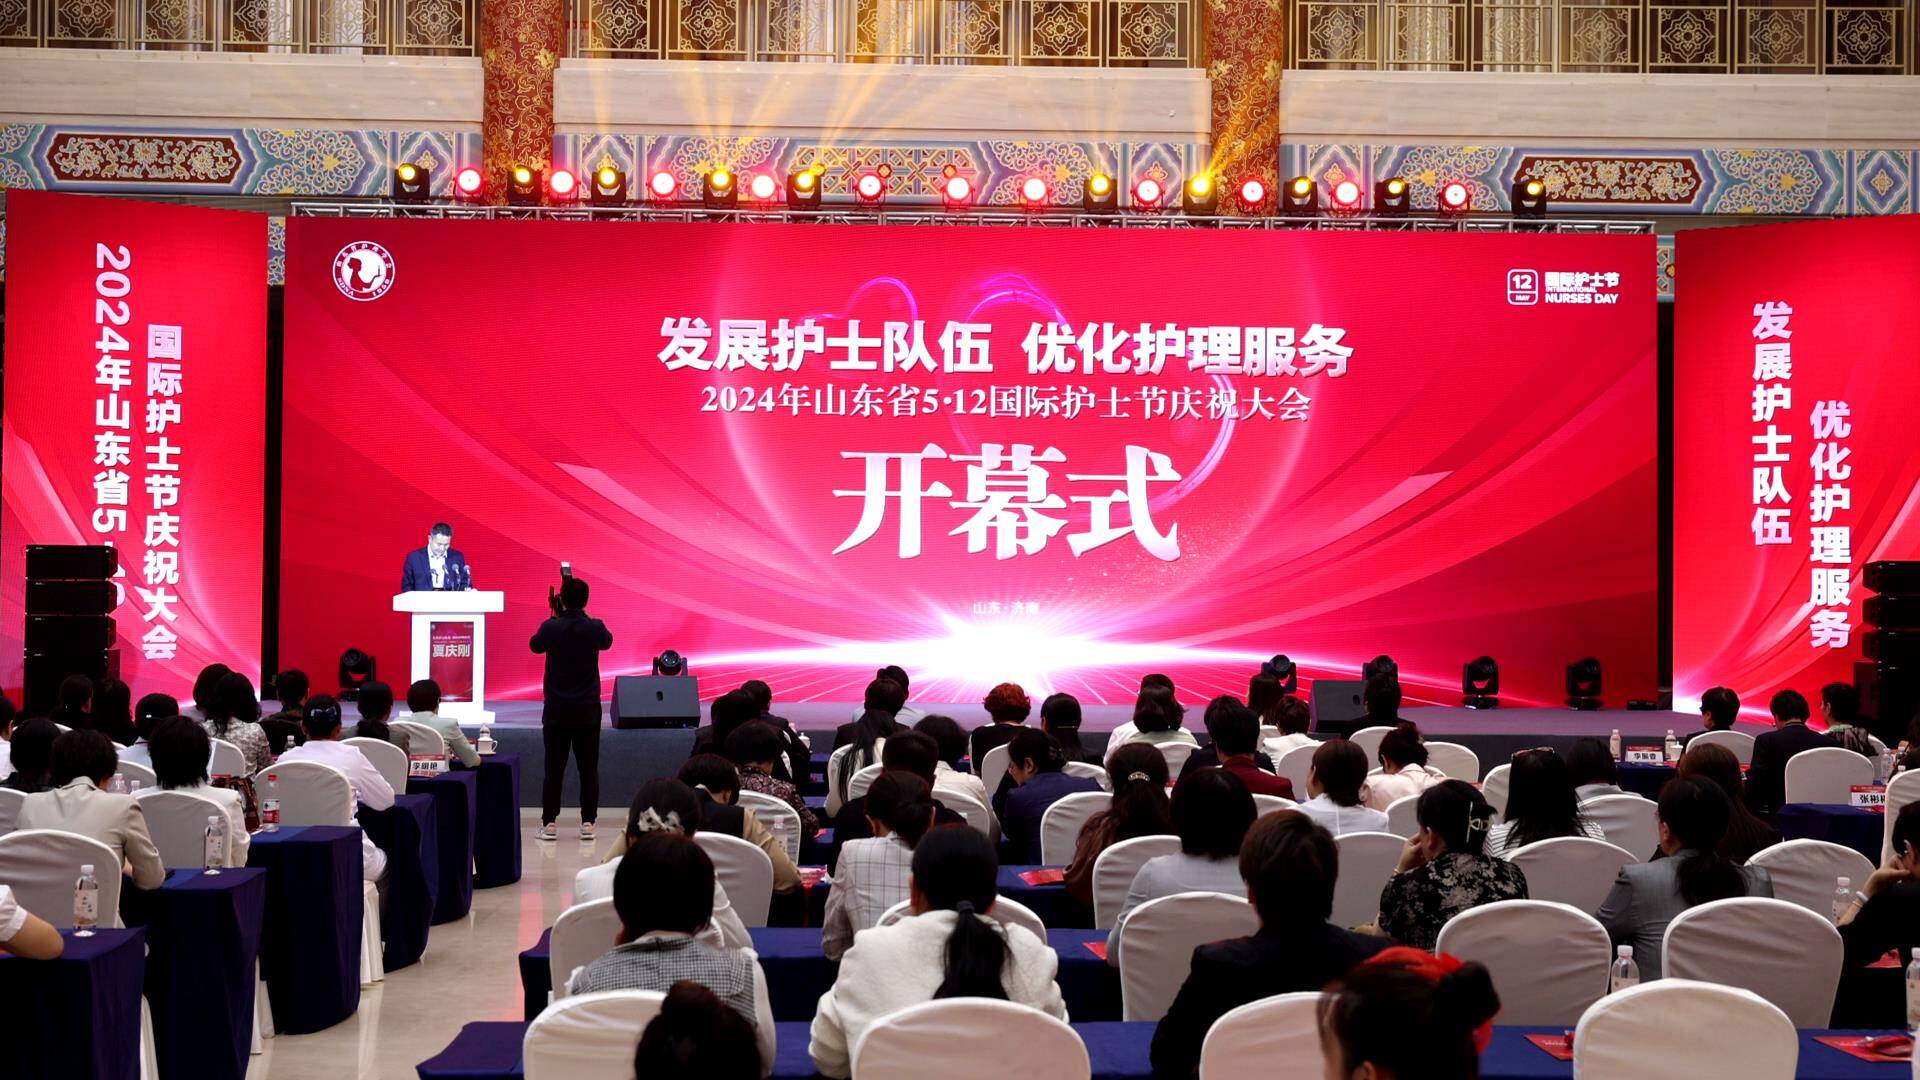  The celebration meeting of "May 12" International Nurses Day in Shandong Province in 2024 was held in Jinan